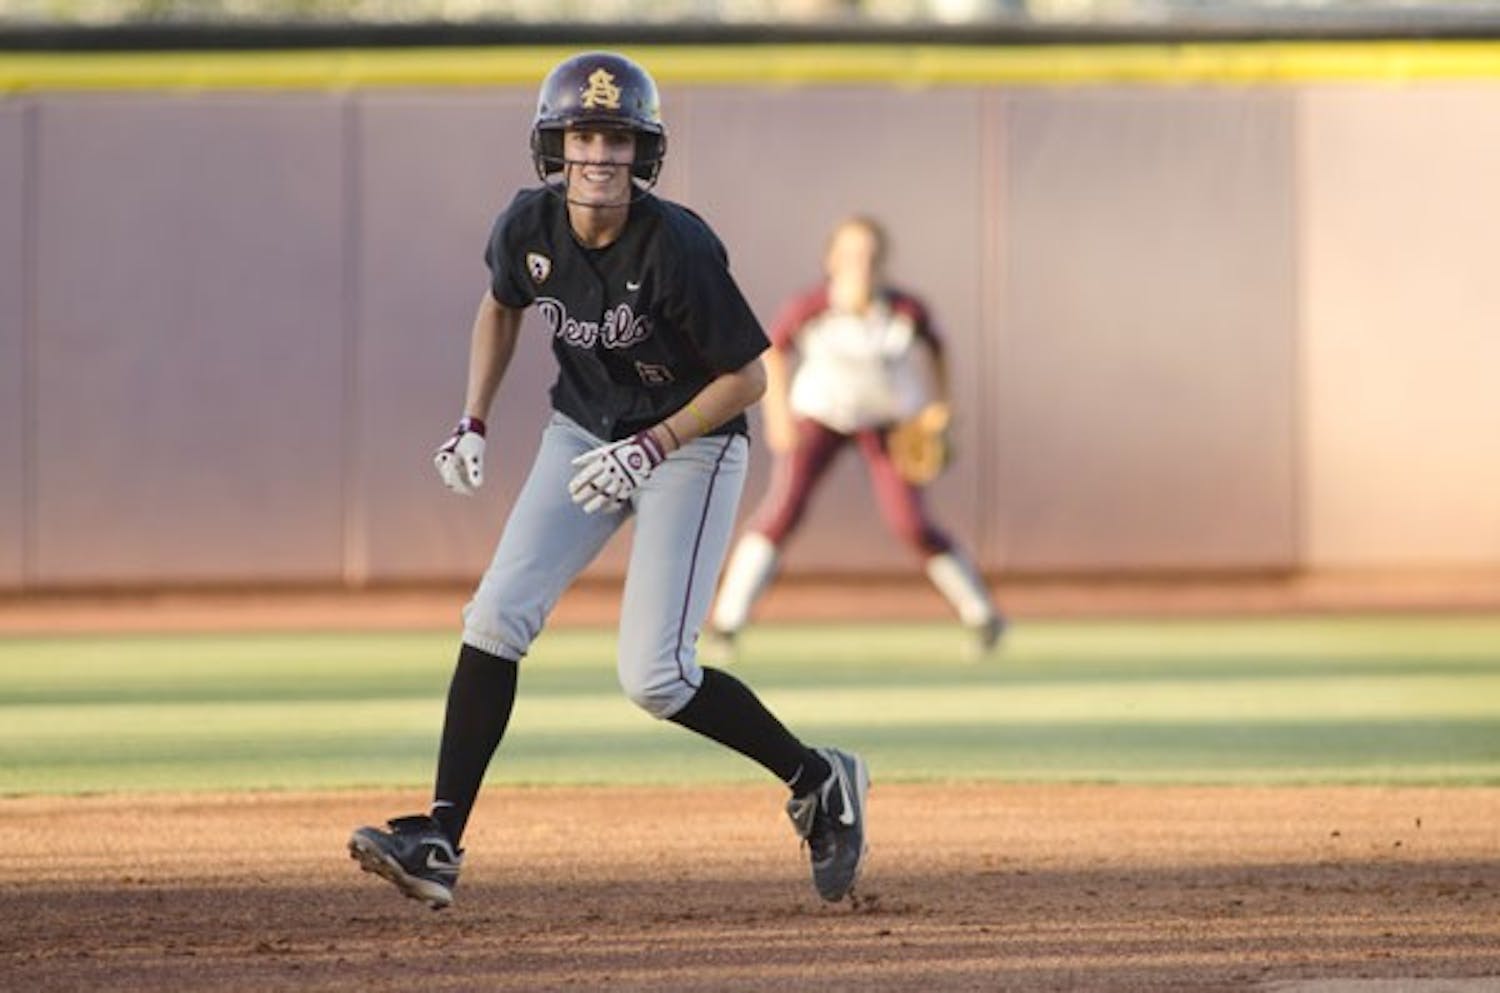 Complete season: ASU senior outfielder Lesley Rogers looks to steal third during the Sun Devils’ 4-2 win over Texas A&M on May 27. Senior leadership was just one of the many factors that led to ASU’s dominance this year.  (Photo by Aaron Lavinsky)